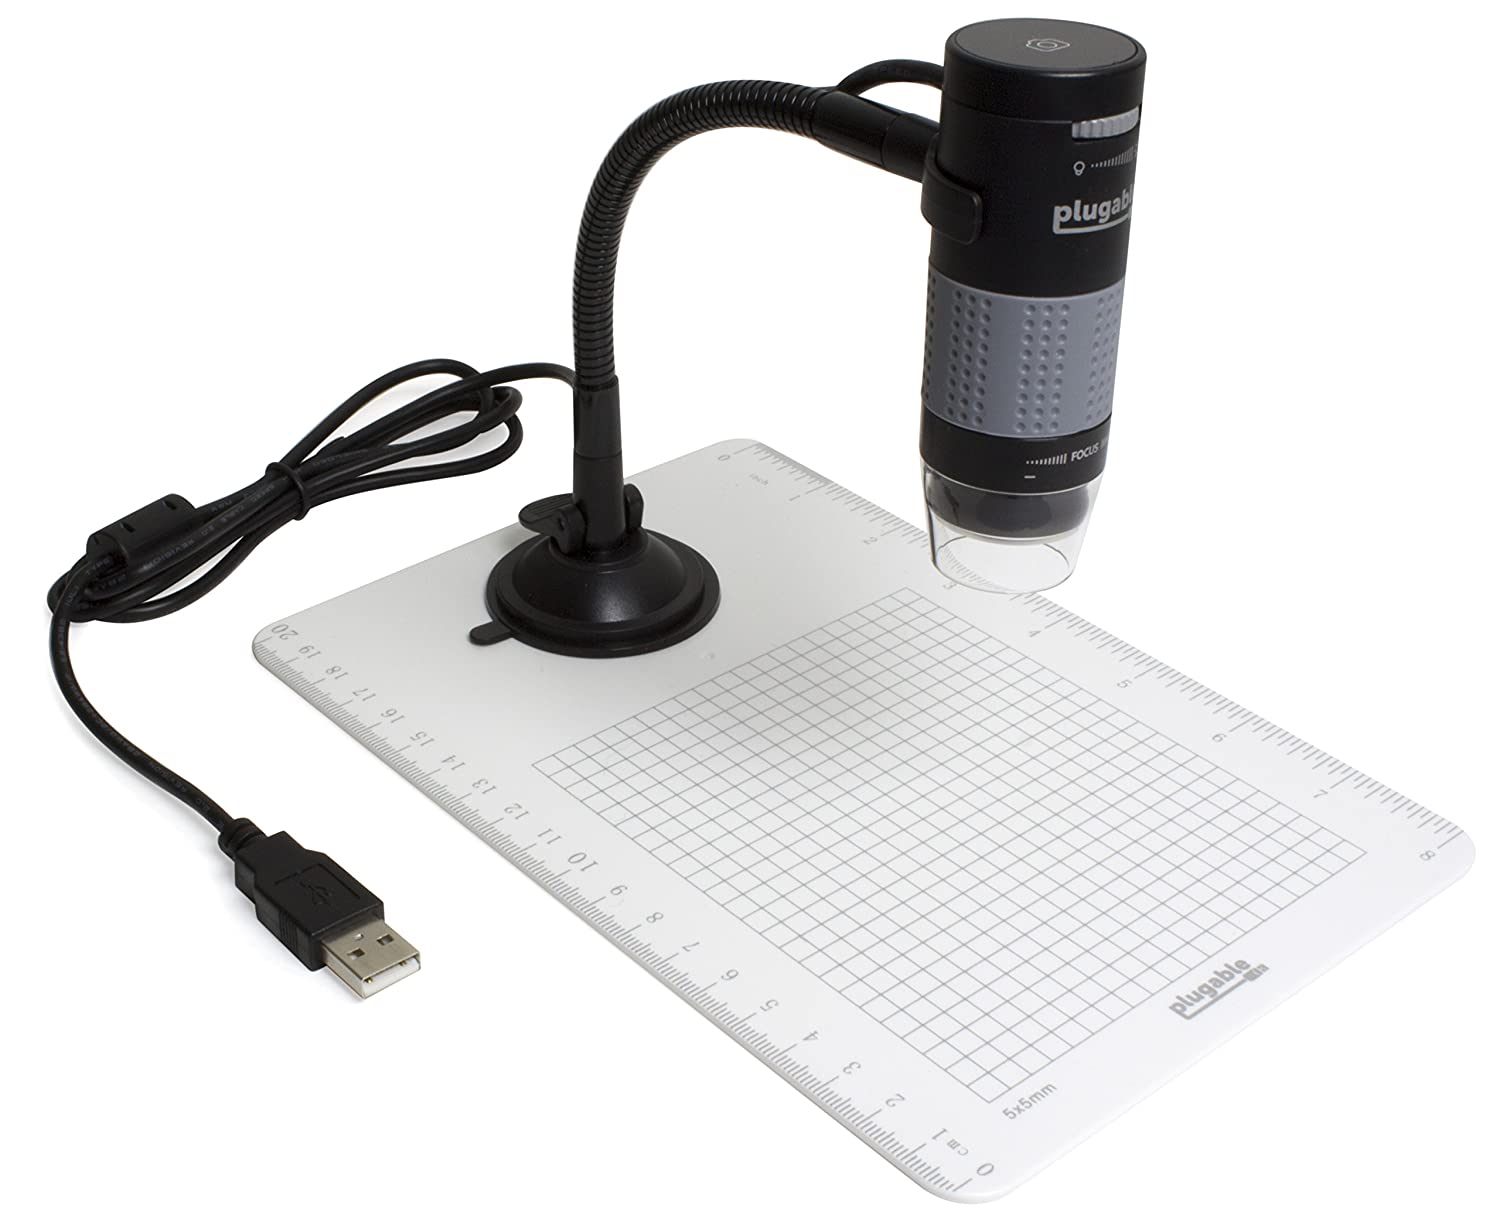 Top 10 Best Microscope for Kids Reviews in 2022 5